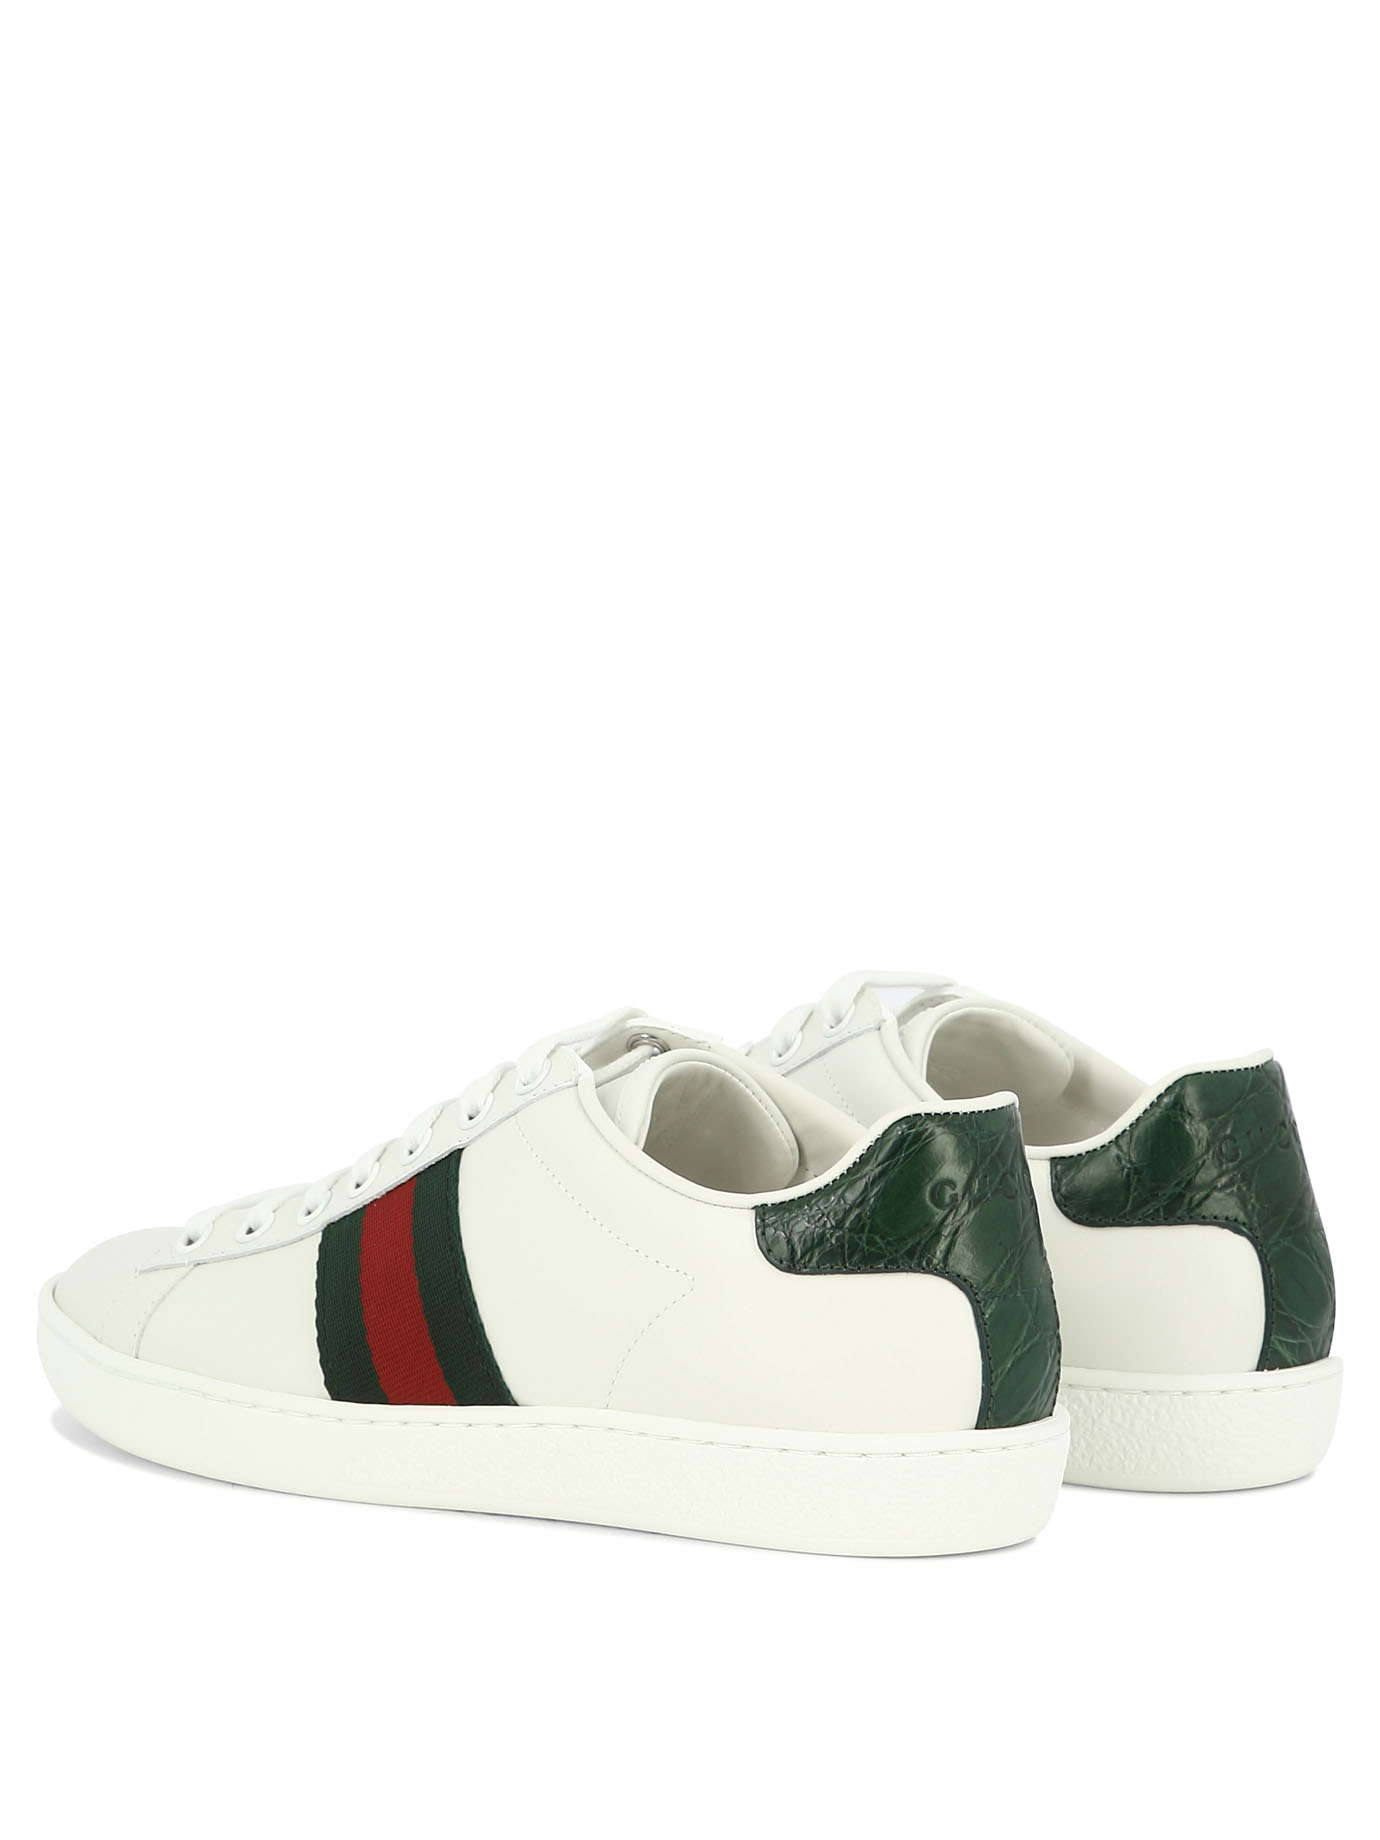 GUCCI Women's Ace Sneakers